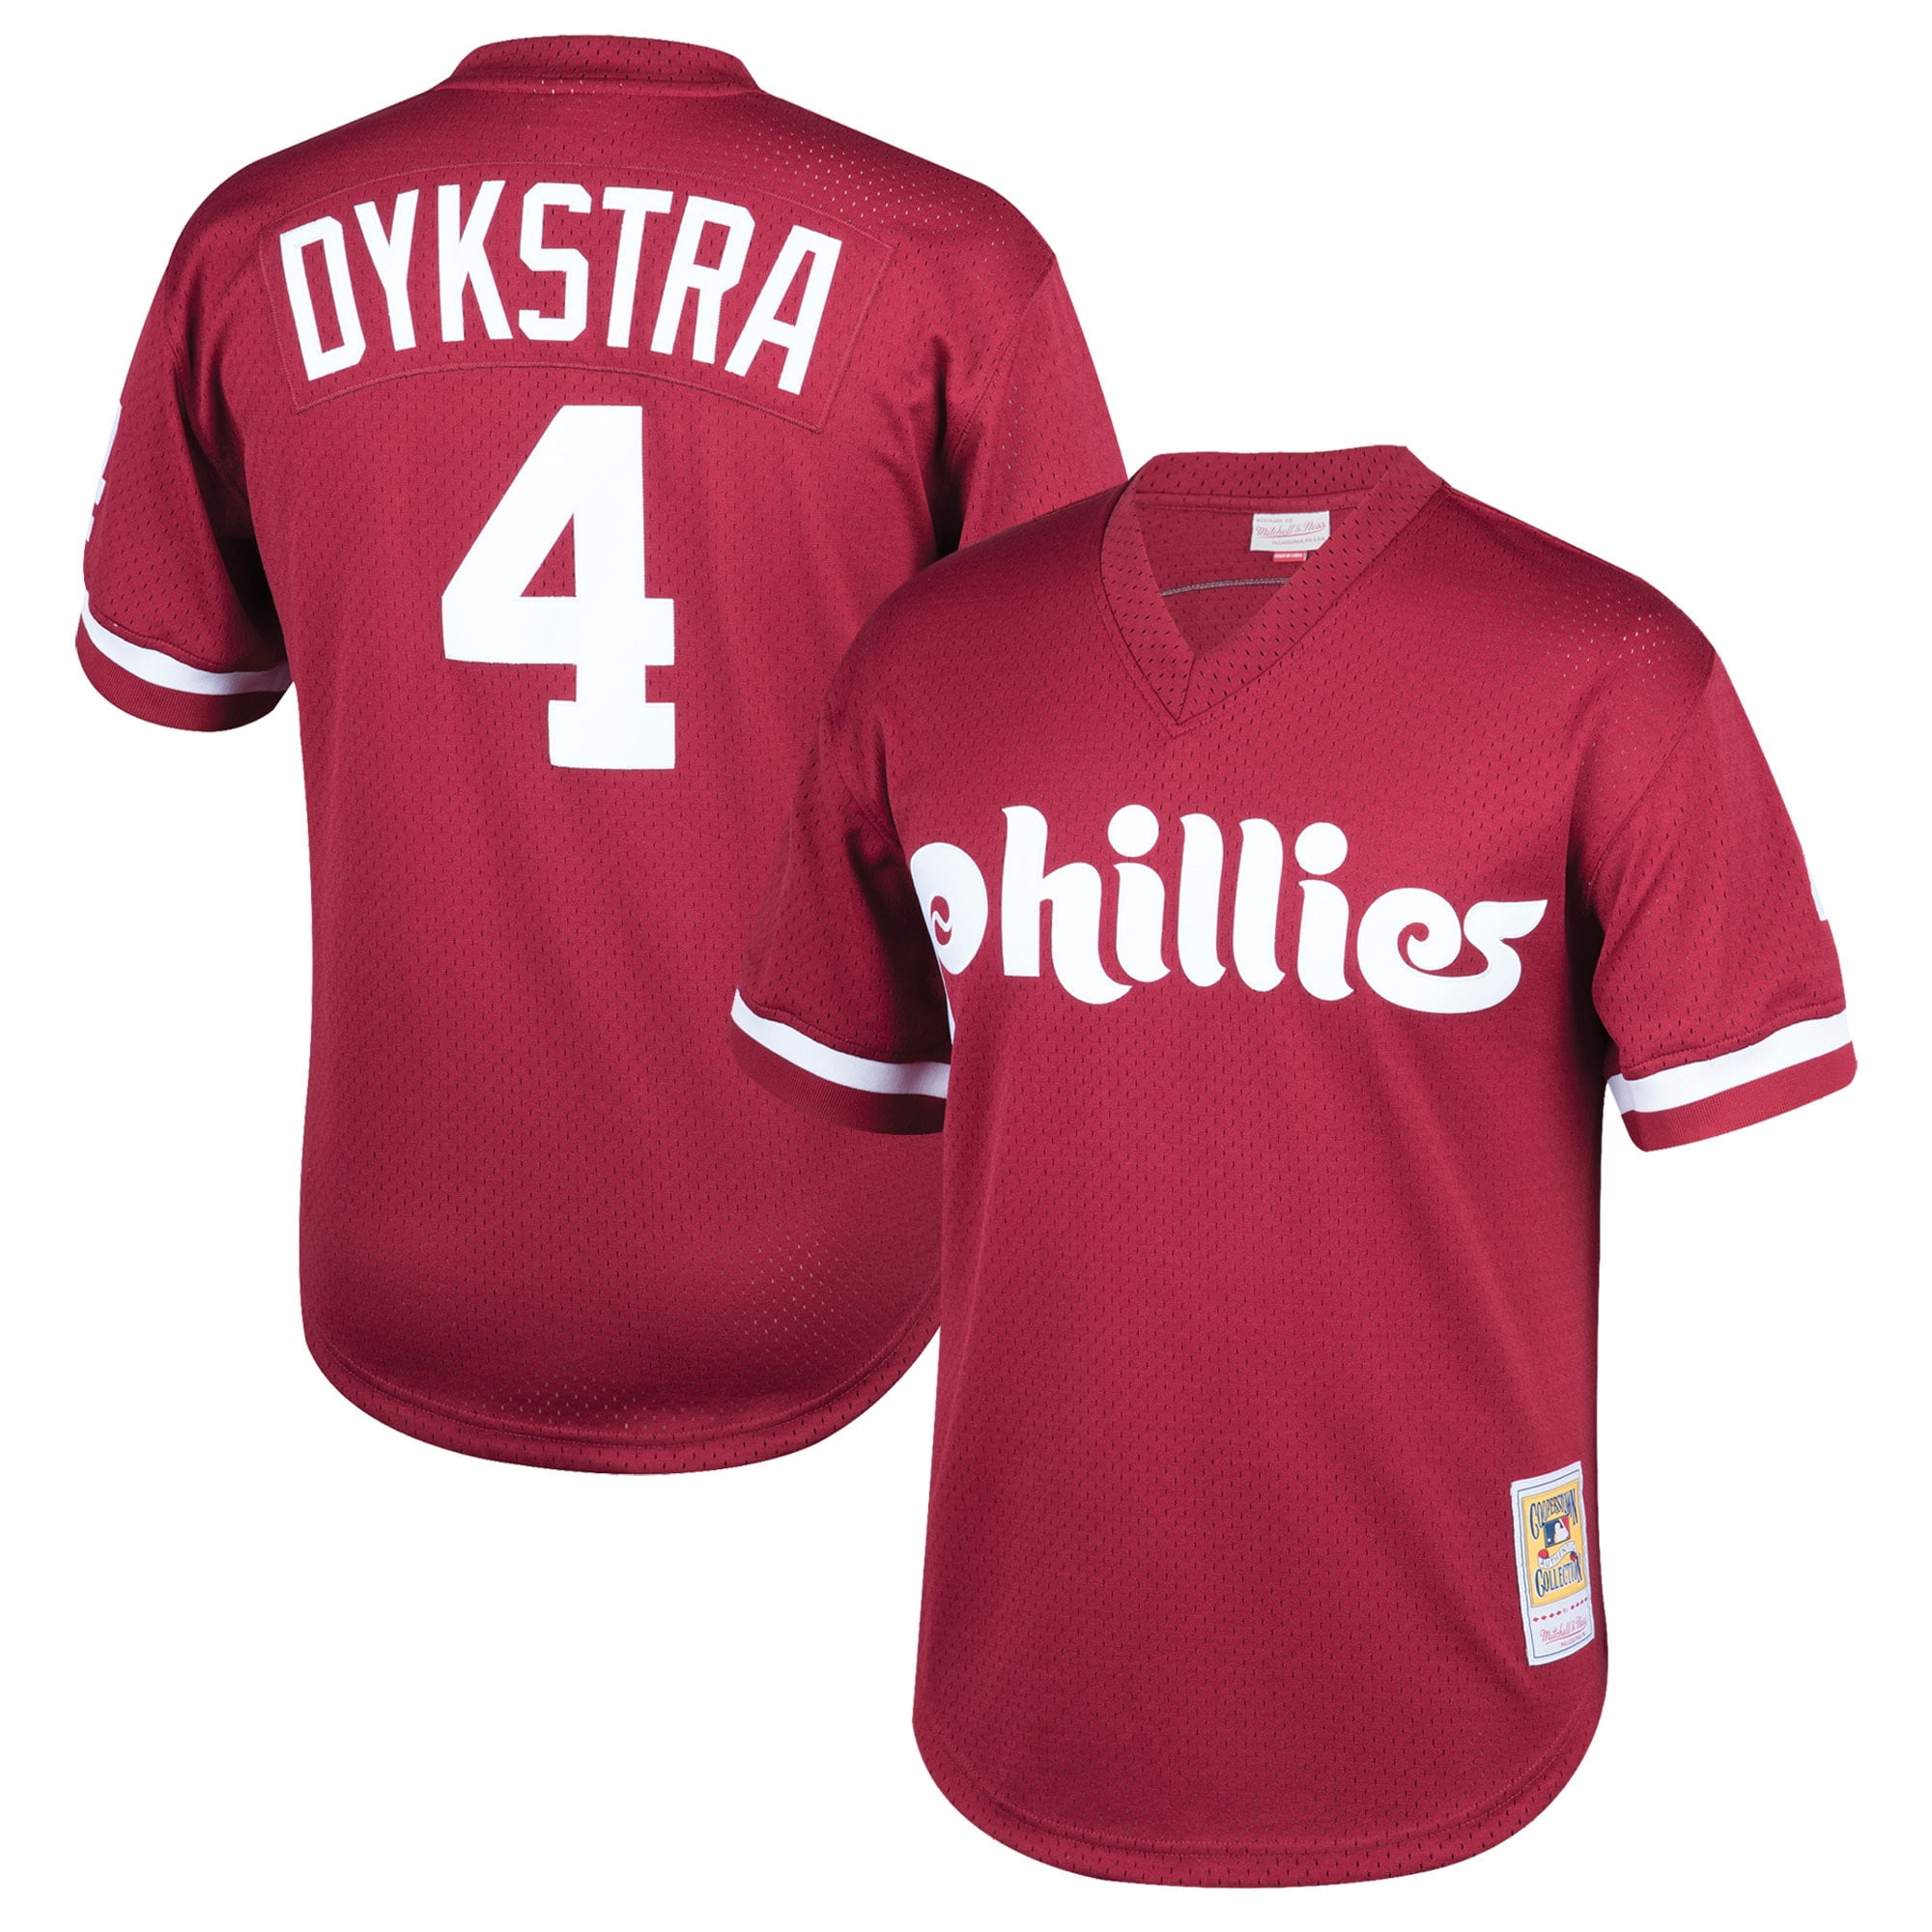 Youth Mitchell u0026 Ness Lenny Dykstra Burgundy Philadelphia Phillies  Cooperstown Collection Mesh Batting Practice Jersey